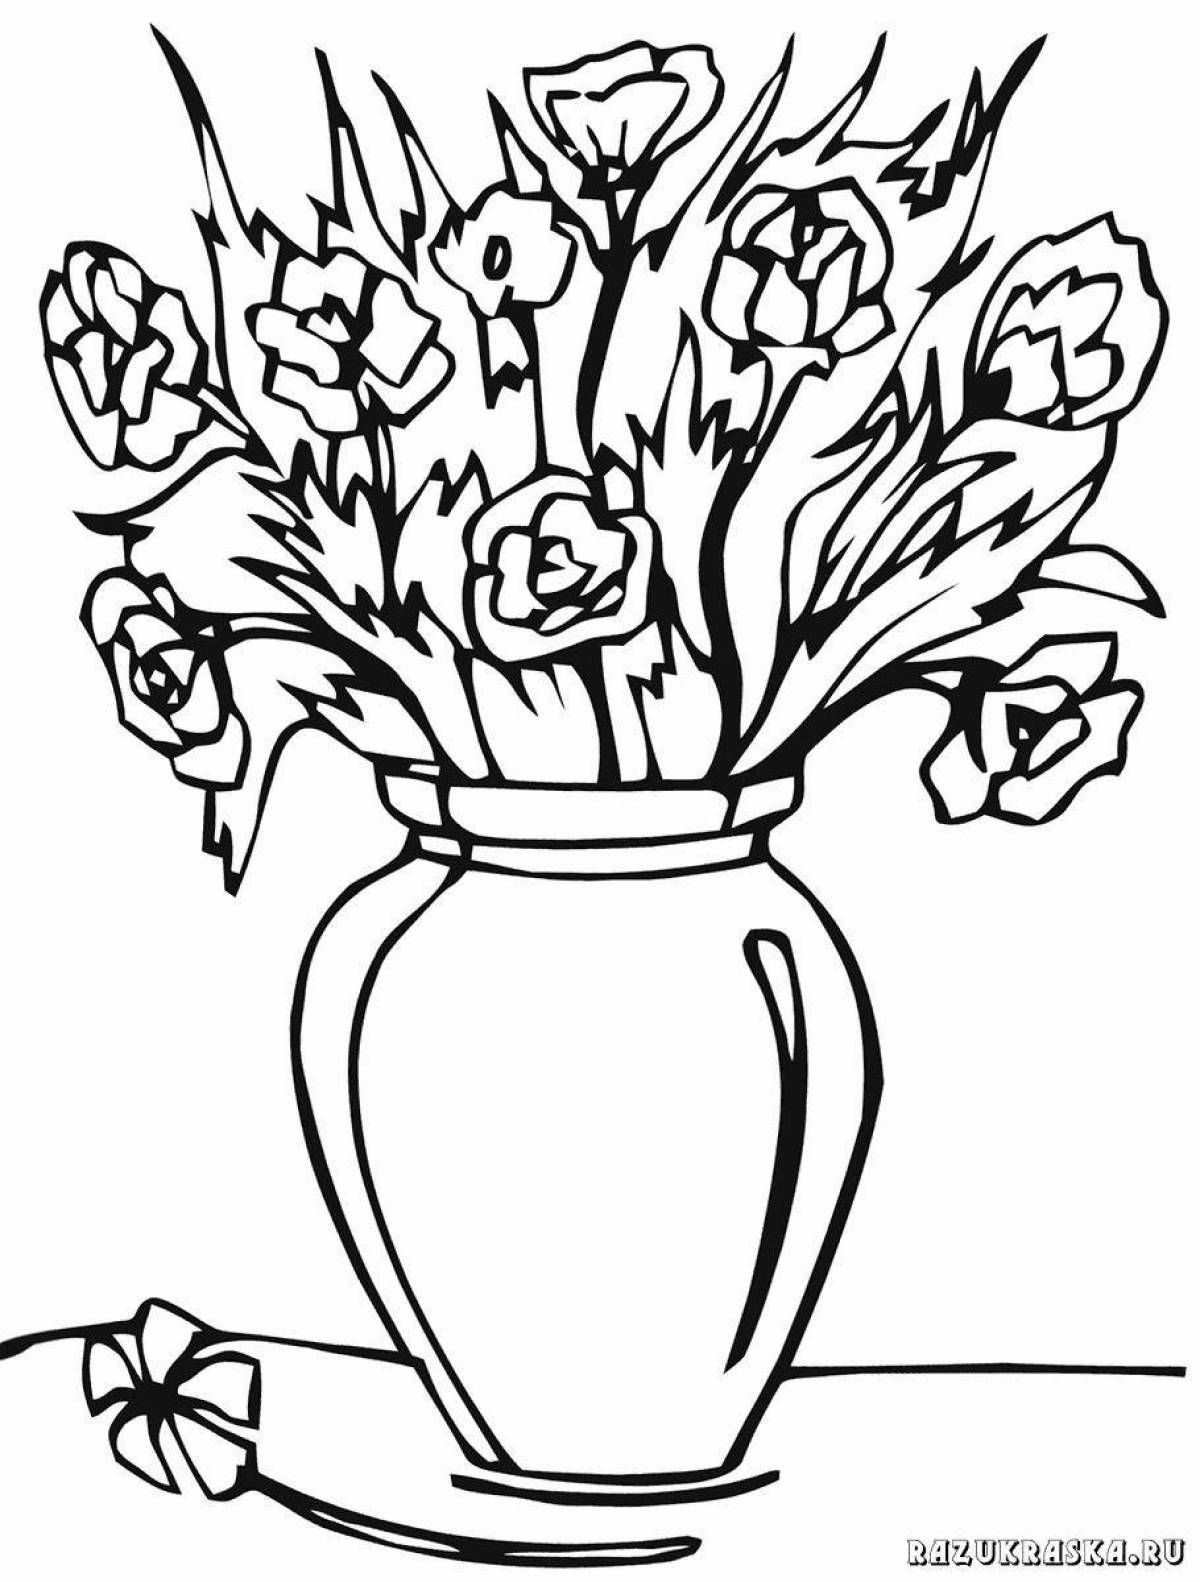 Fun coloring flowers in a vase for children 6-7 years old